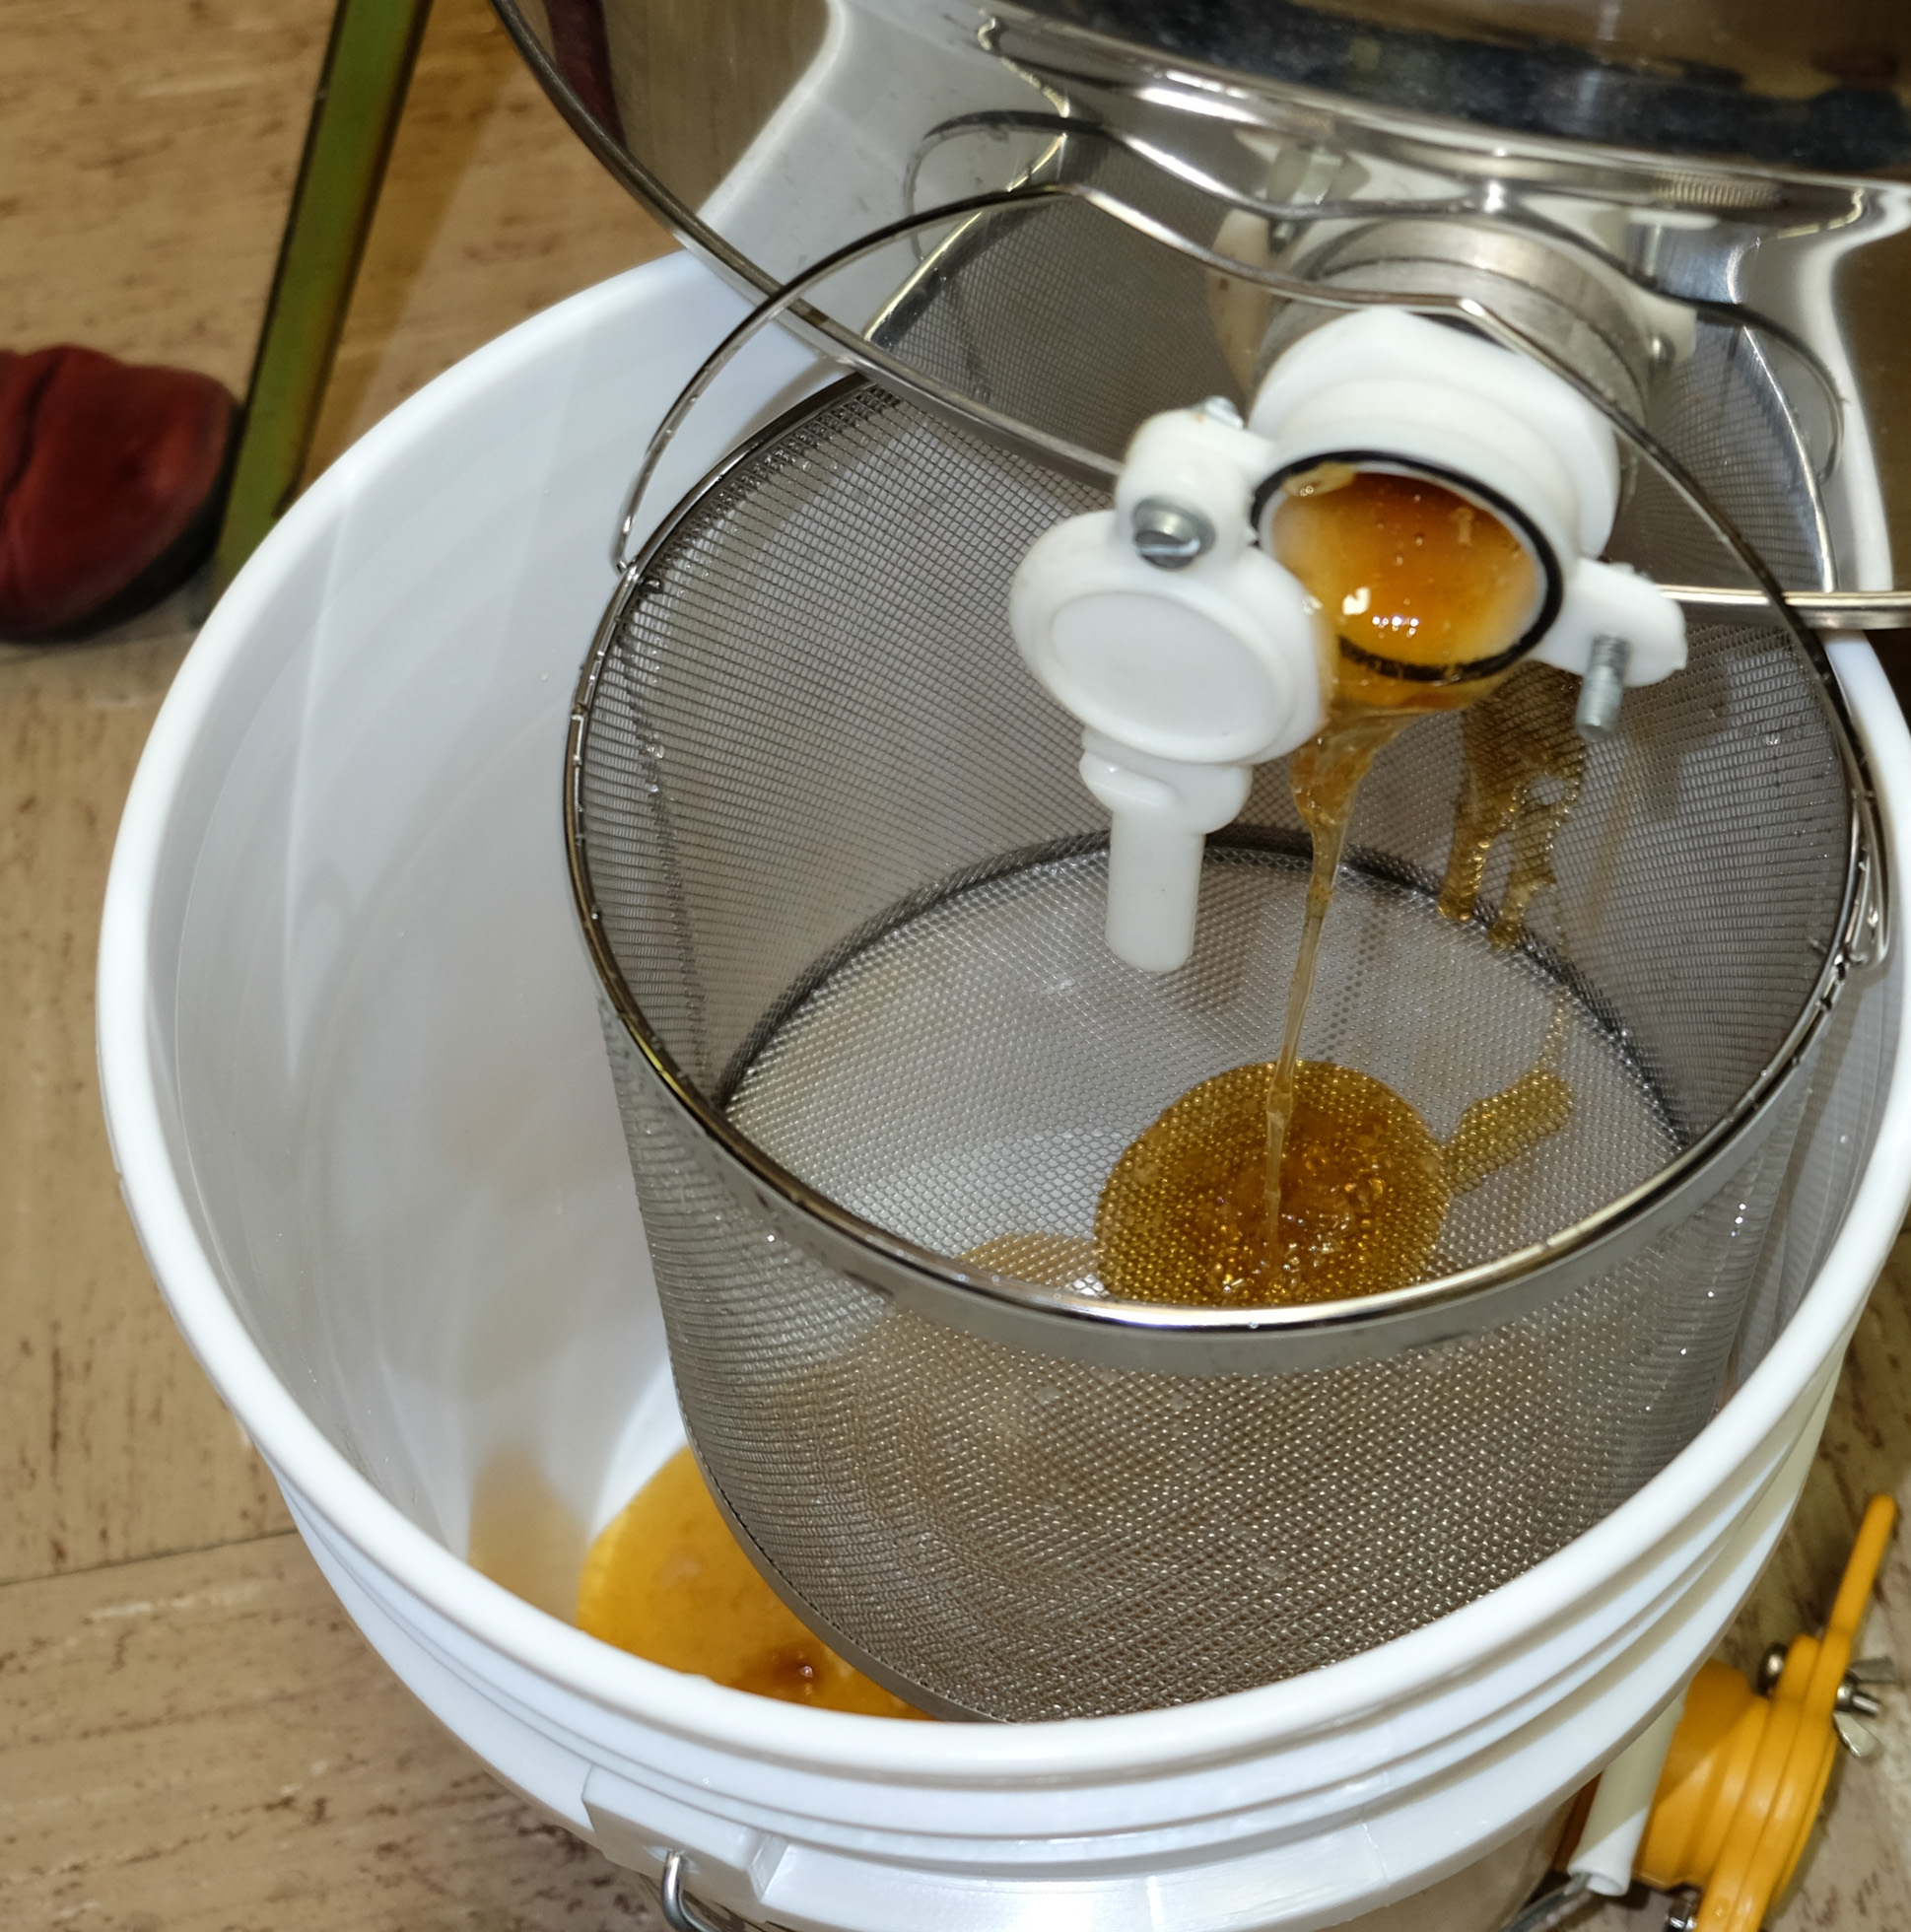 Honey flows from the extractor and any wax is filtered from the sieve.